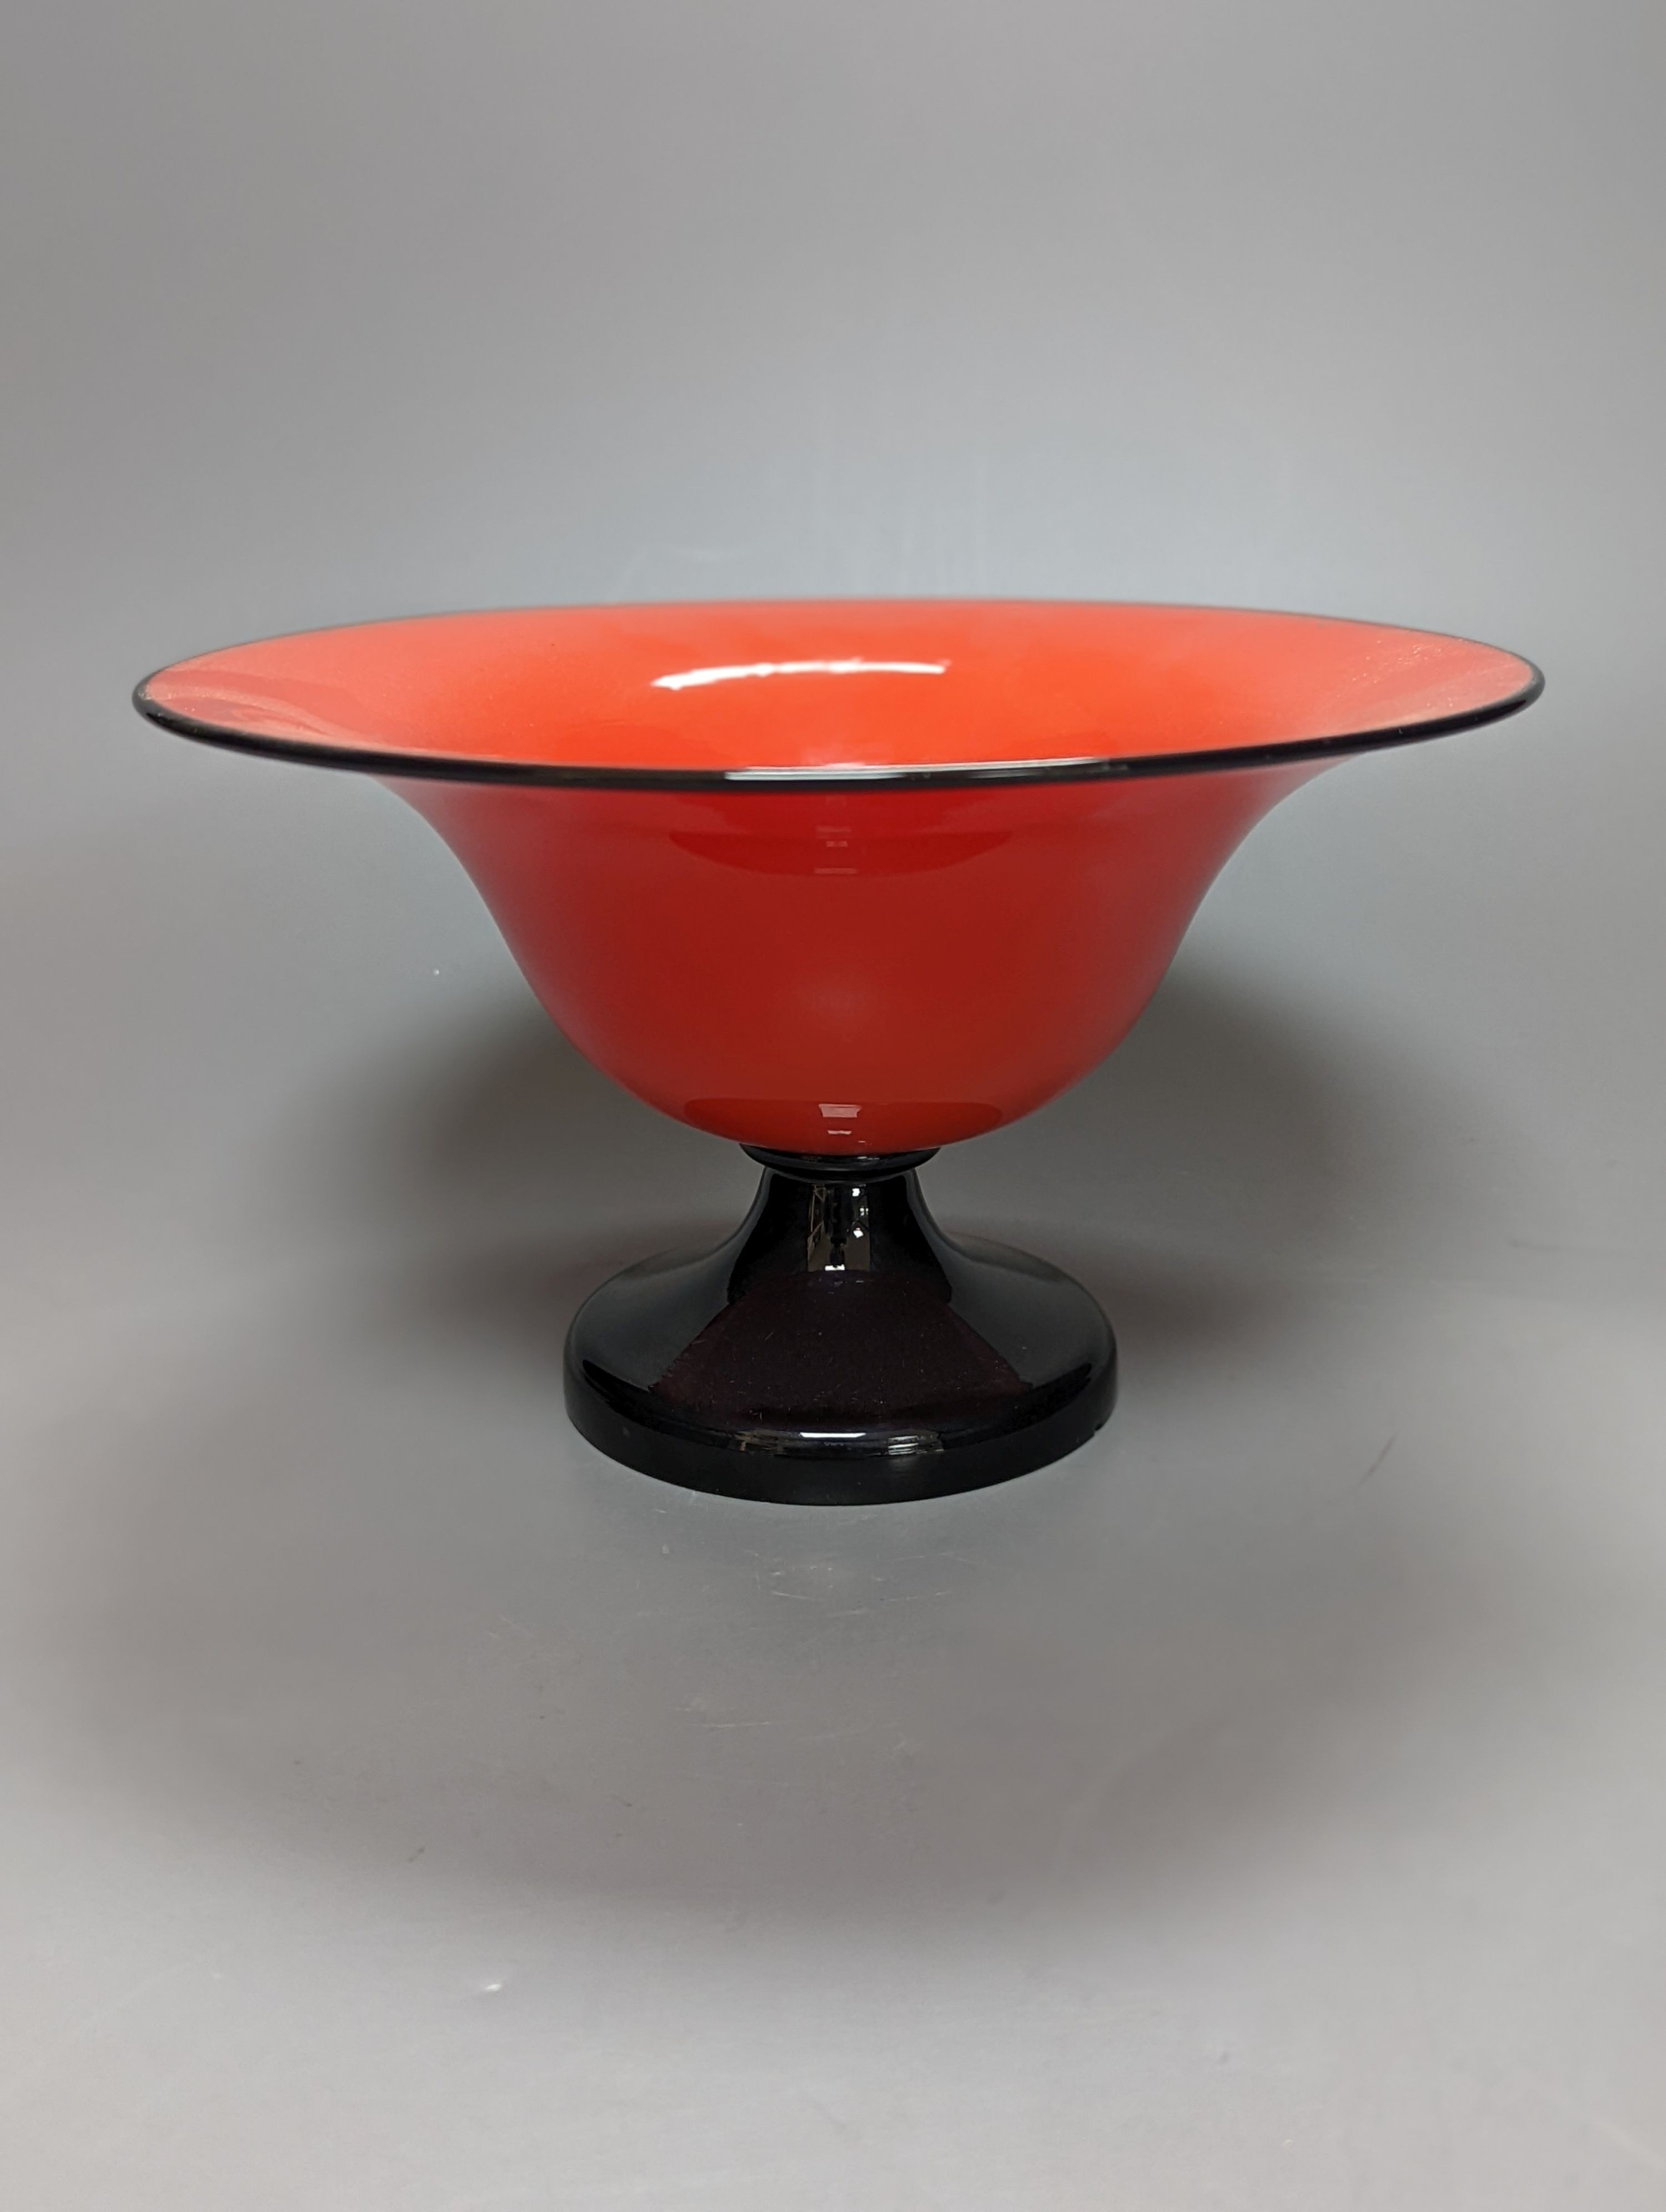 Attributed to Michael Powolny for Loetz. A red and black glass pedestal bowl, 1920s, diameter 22.5cm